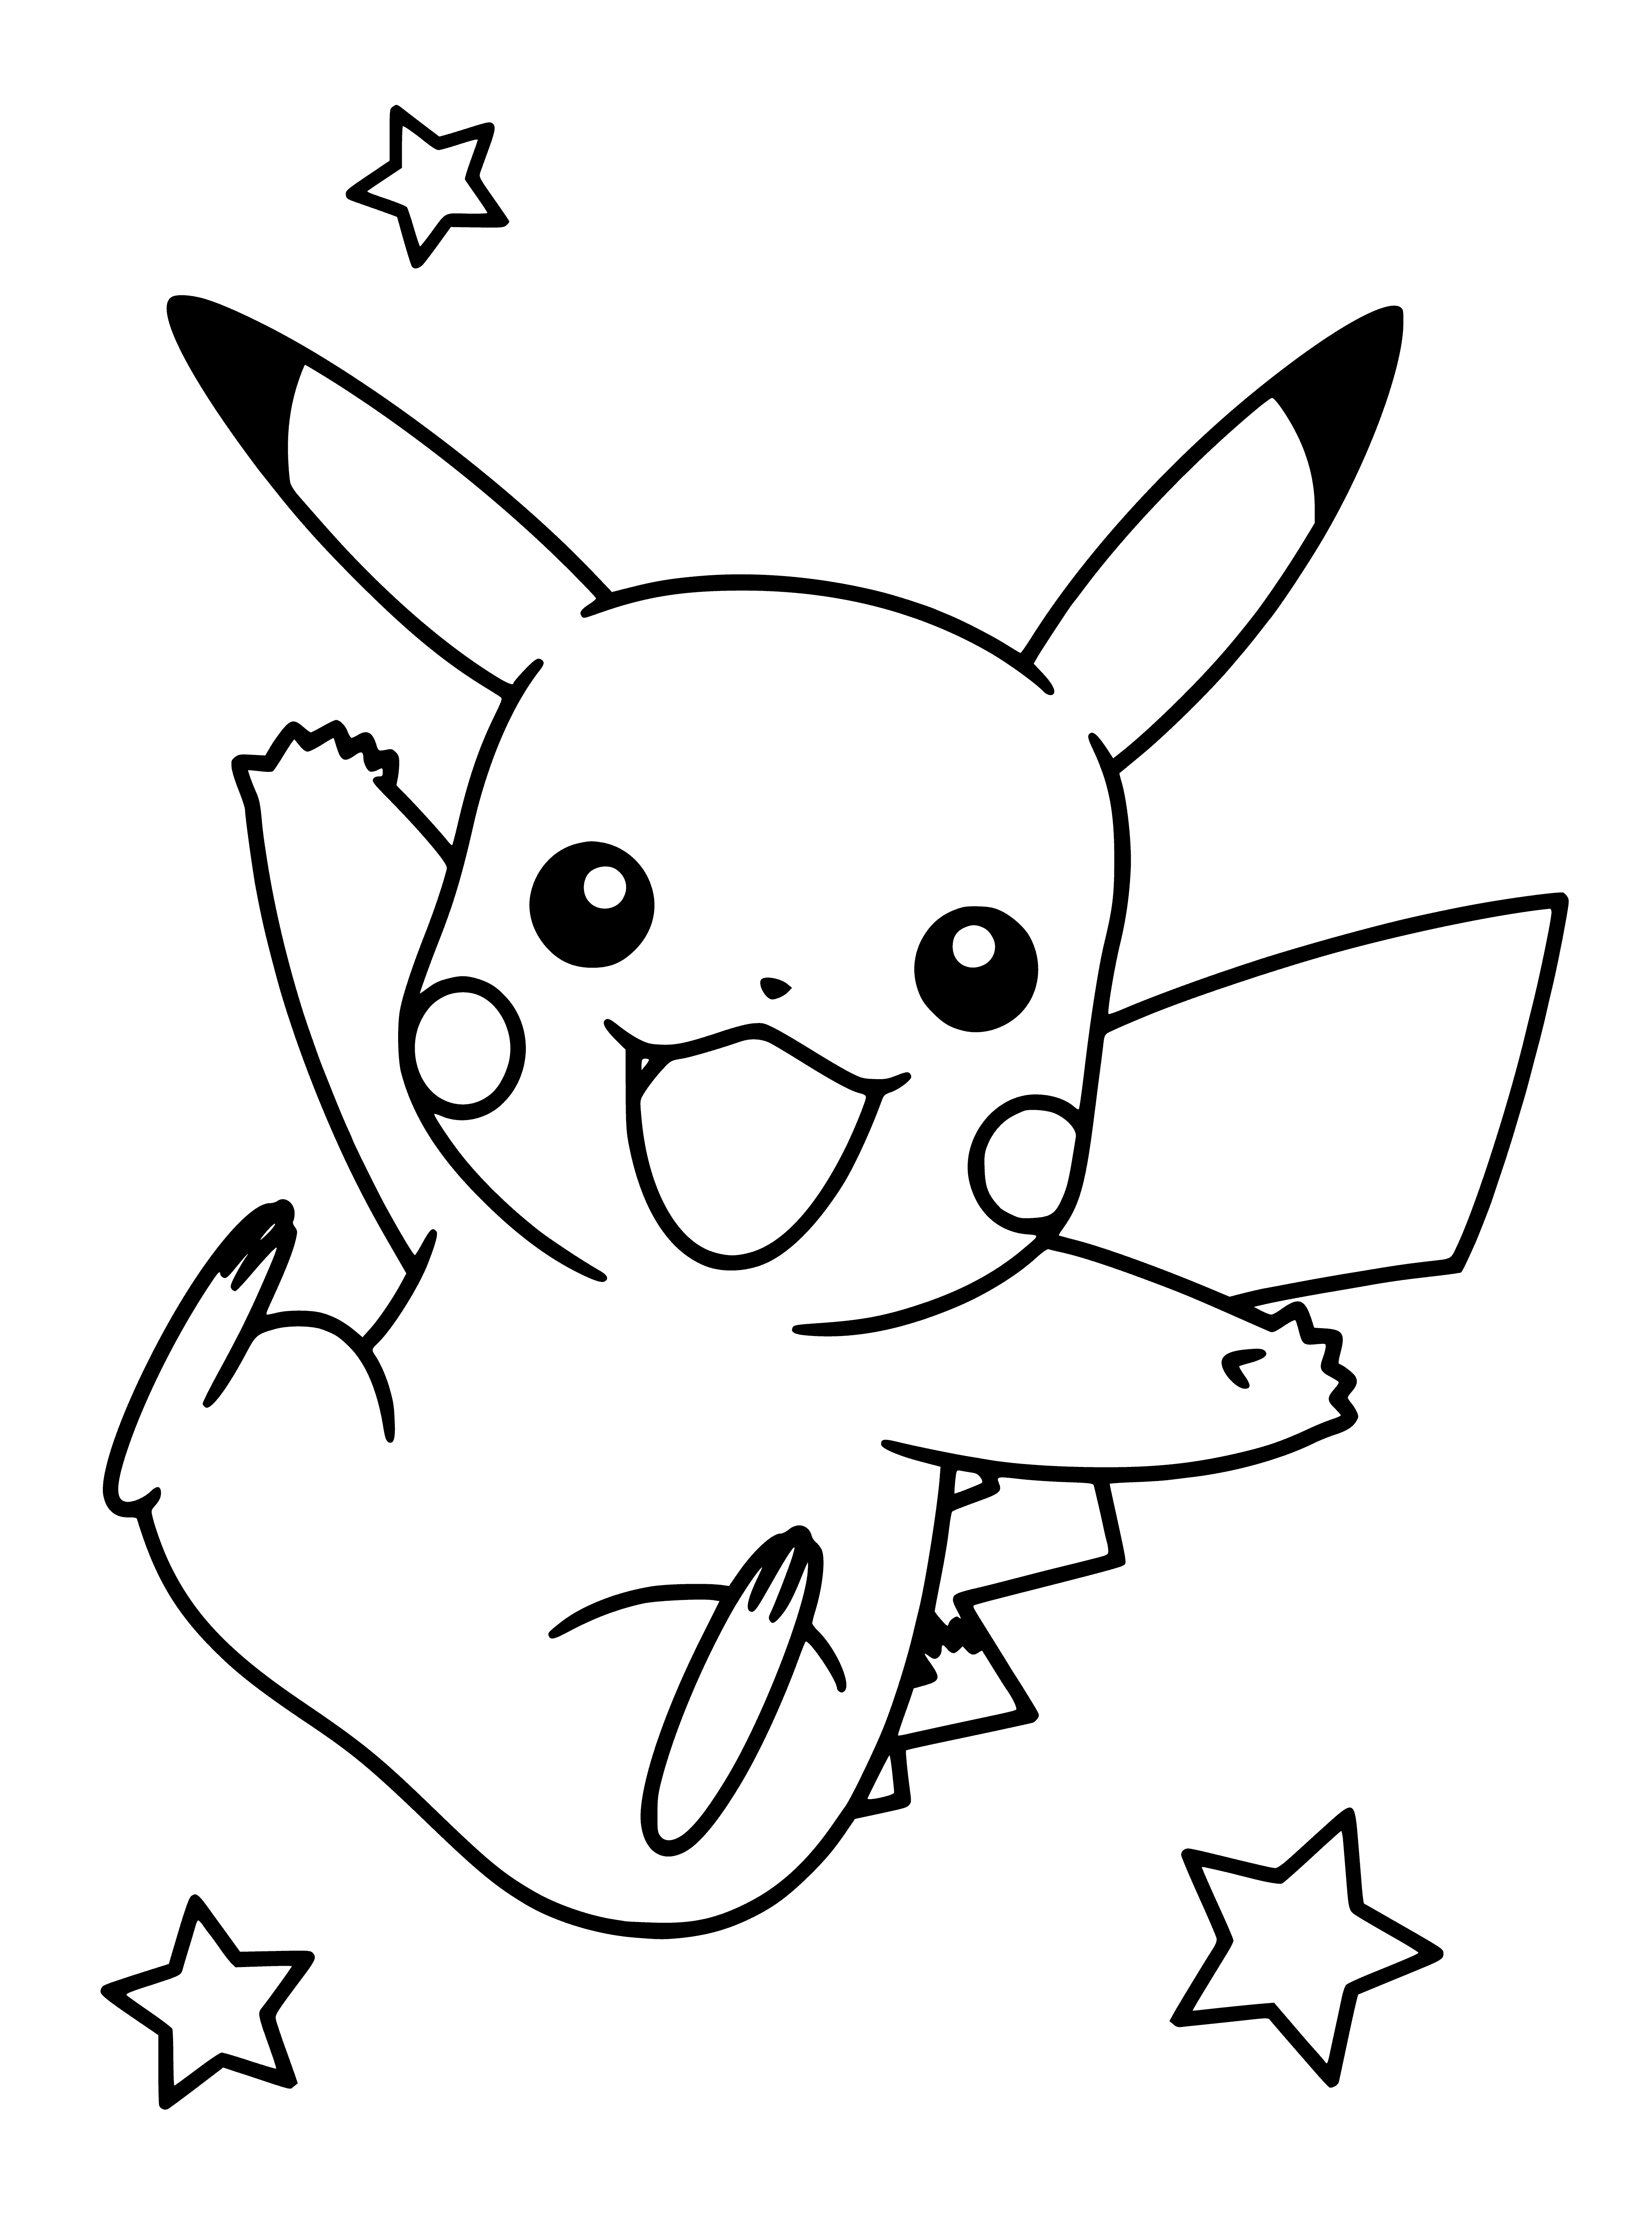 coloring page: Popular Pokémon Pikachu is a small rodent-like yellow furred creature w/ black eyes & red stripes on its back.